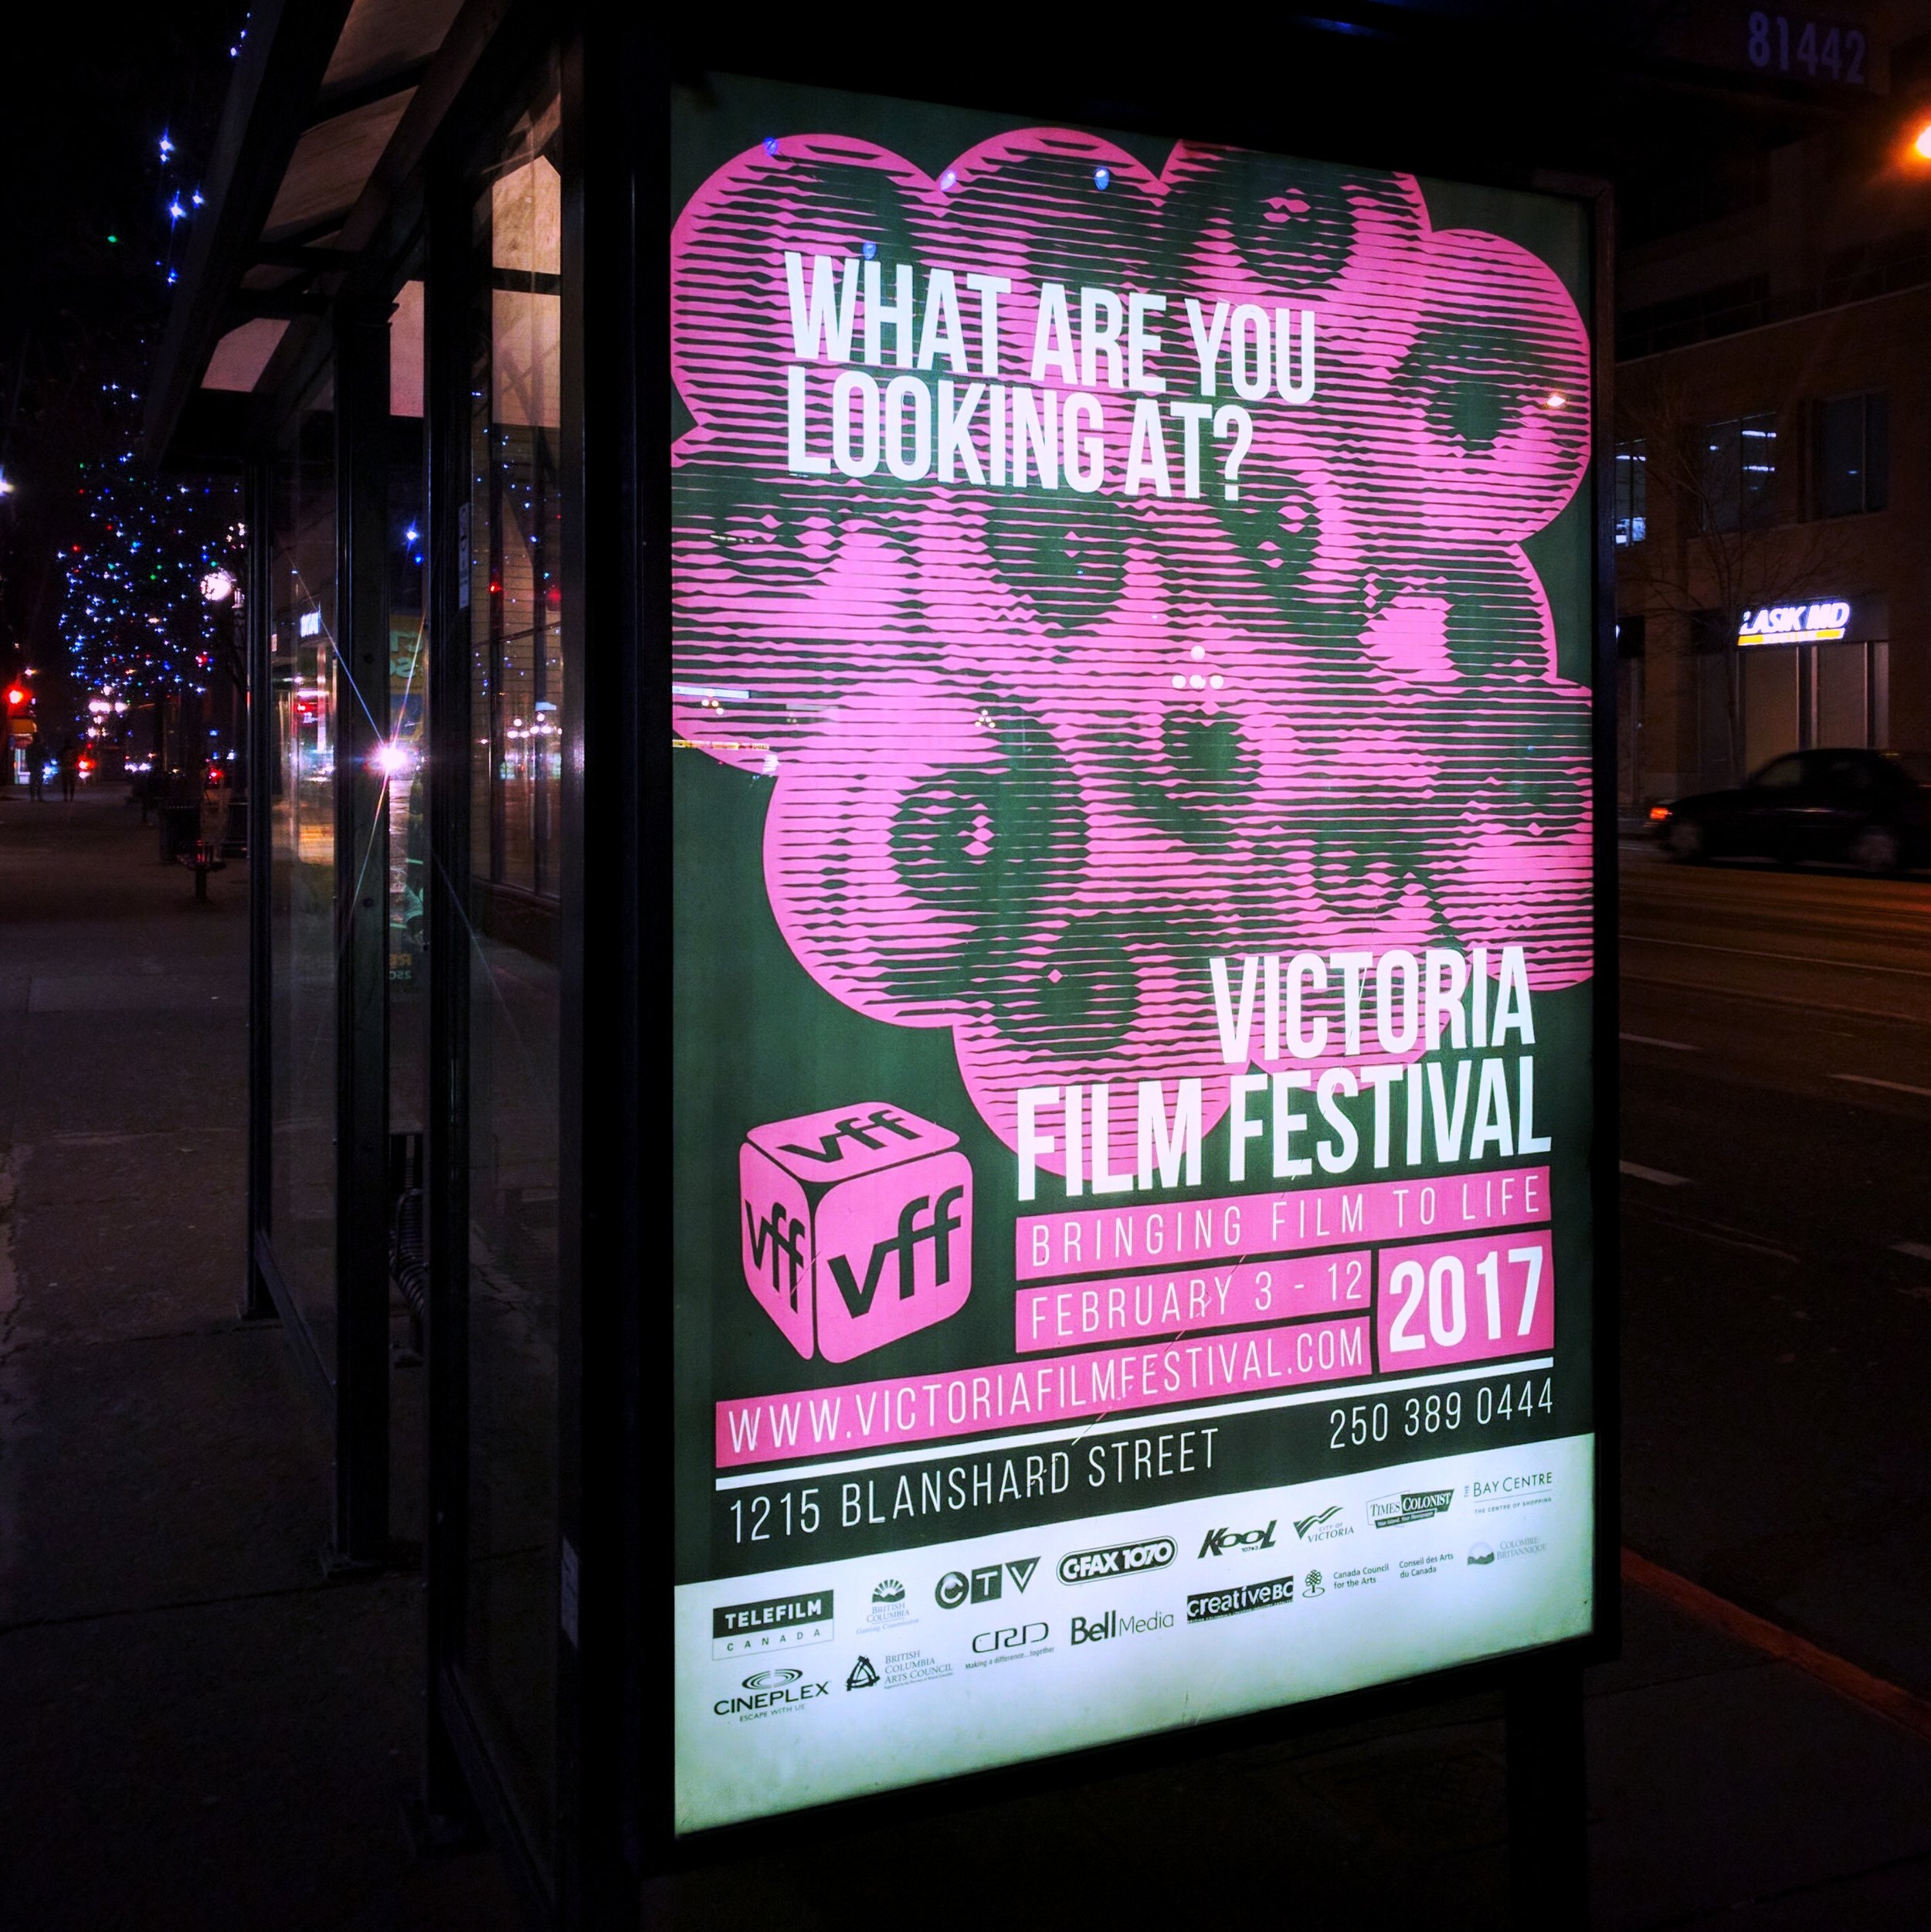  The Victoria Film Festival commissioned us to design the graphic presence of their 2017 event, including this poster design which popped up on a bus shelter next to Victoria City Hall. 